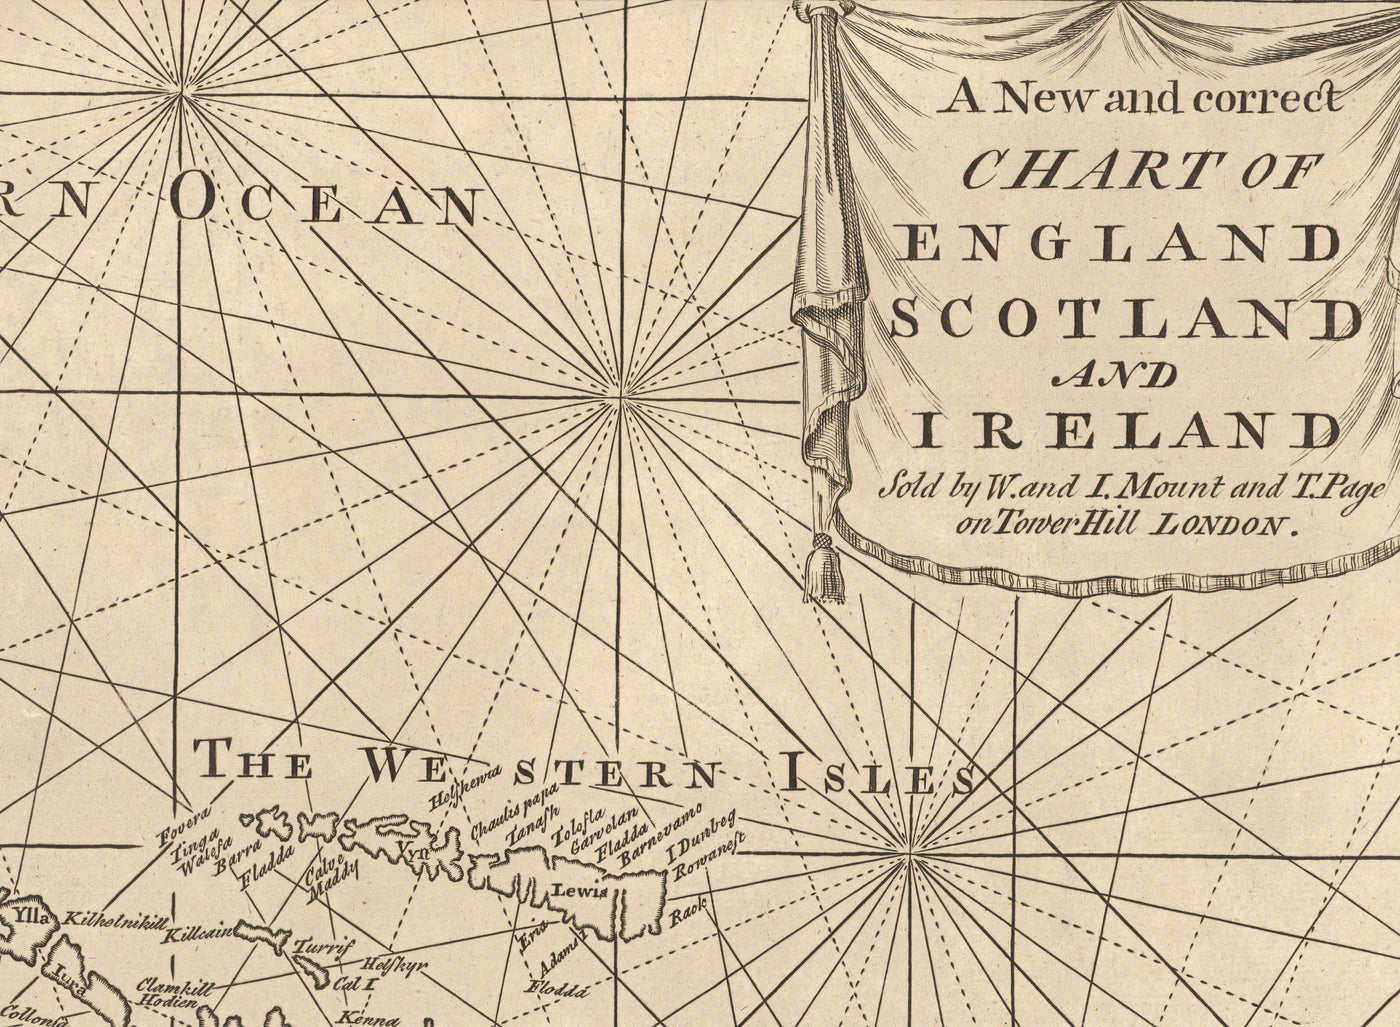 Old British Isles Navigation Chart, 1752 by Page & Mount - Ports, Sailing Distances in Leagues, English Channel